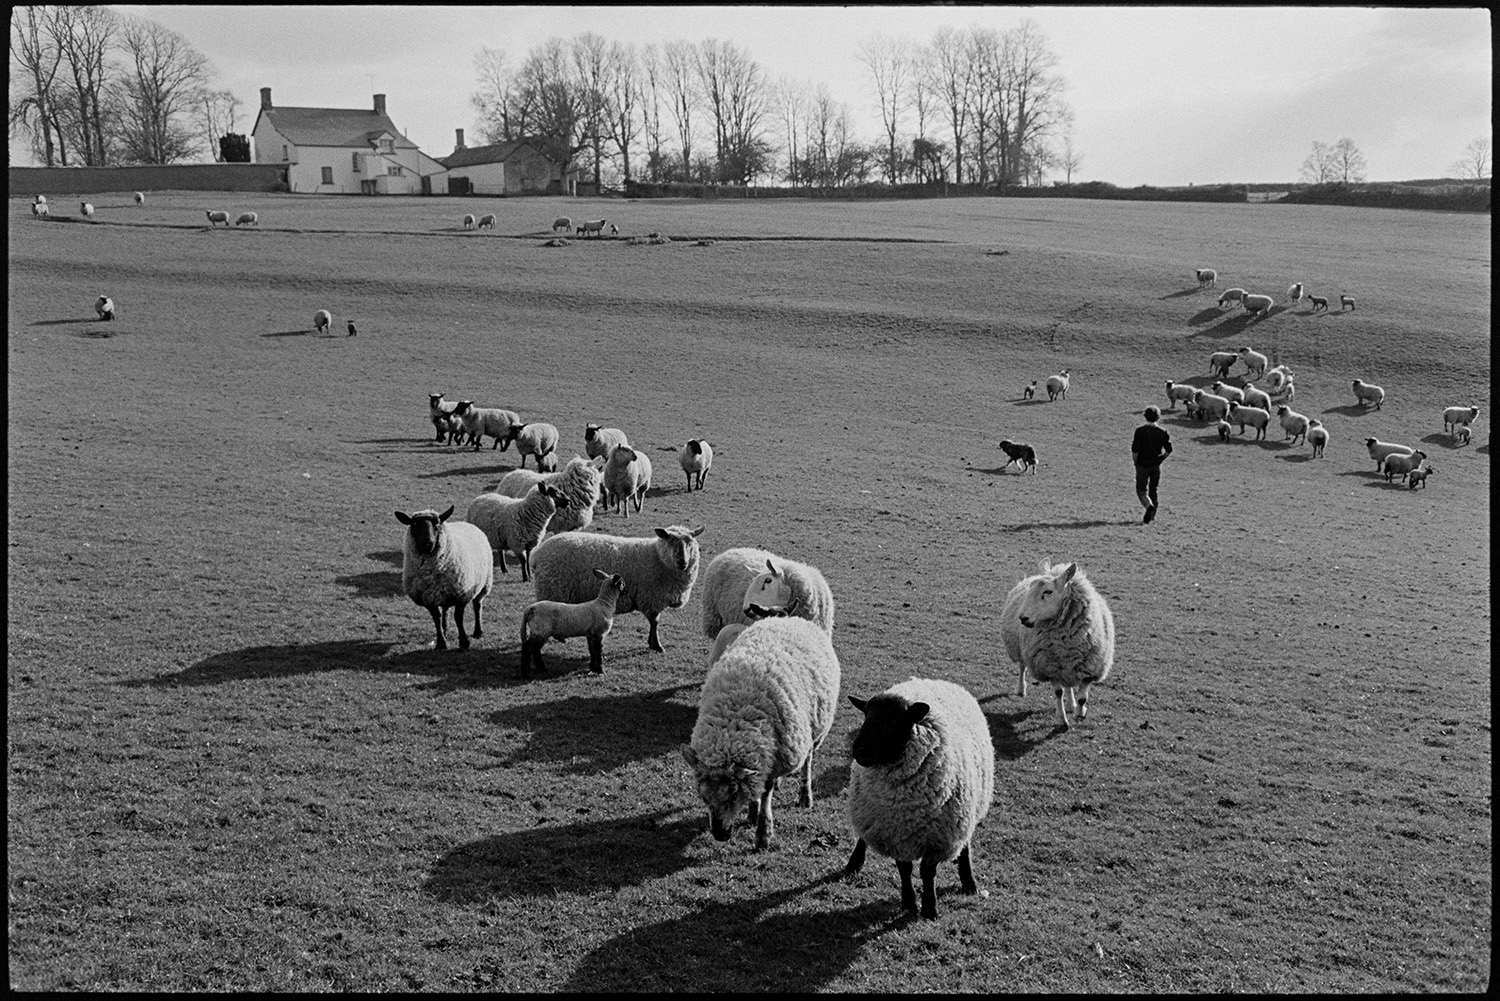 Farmer checking sheep and lambs. 
[Graham Ward and a dog checking sheep and lambs in a field at Parsonage, Iddesleigh. A farmhouse can be seen in the background.]